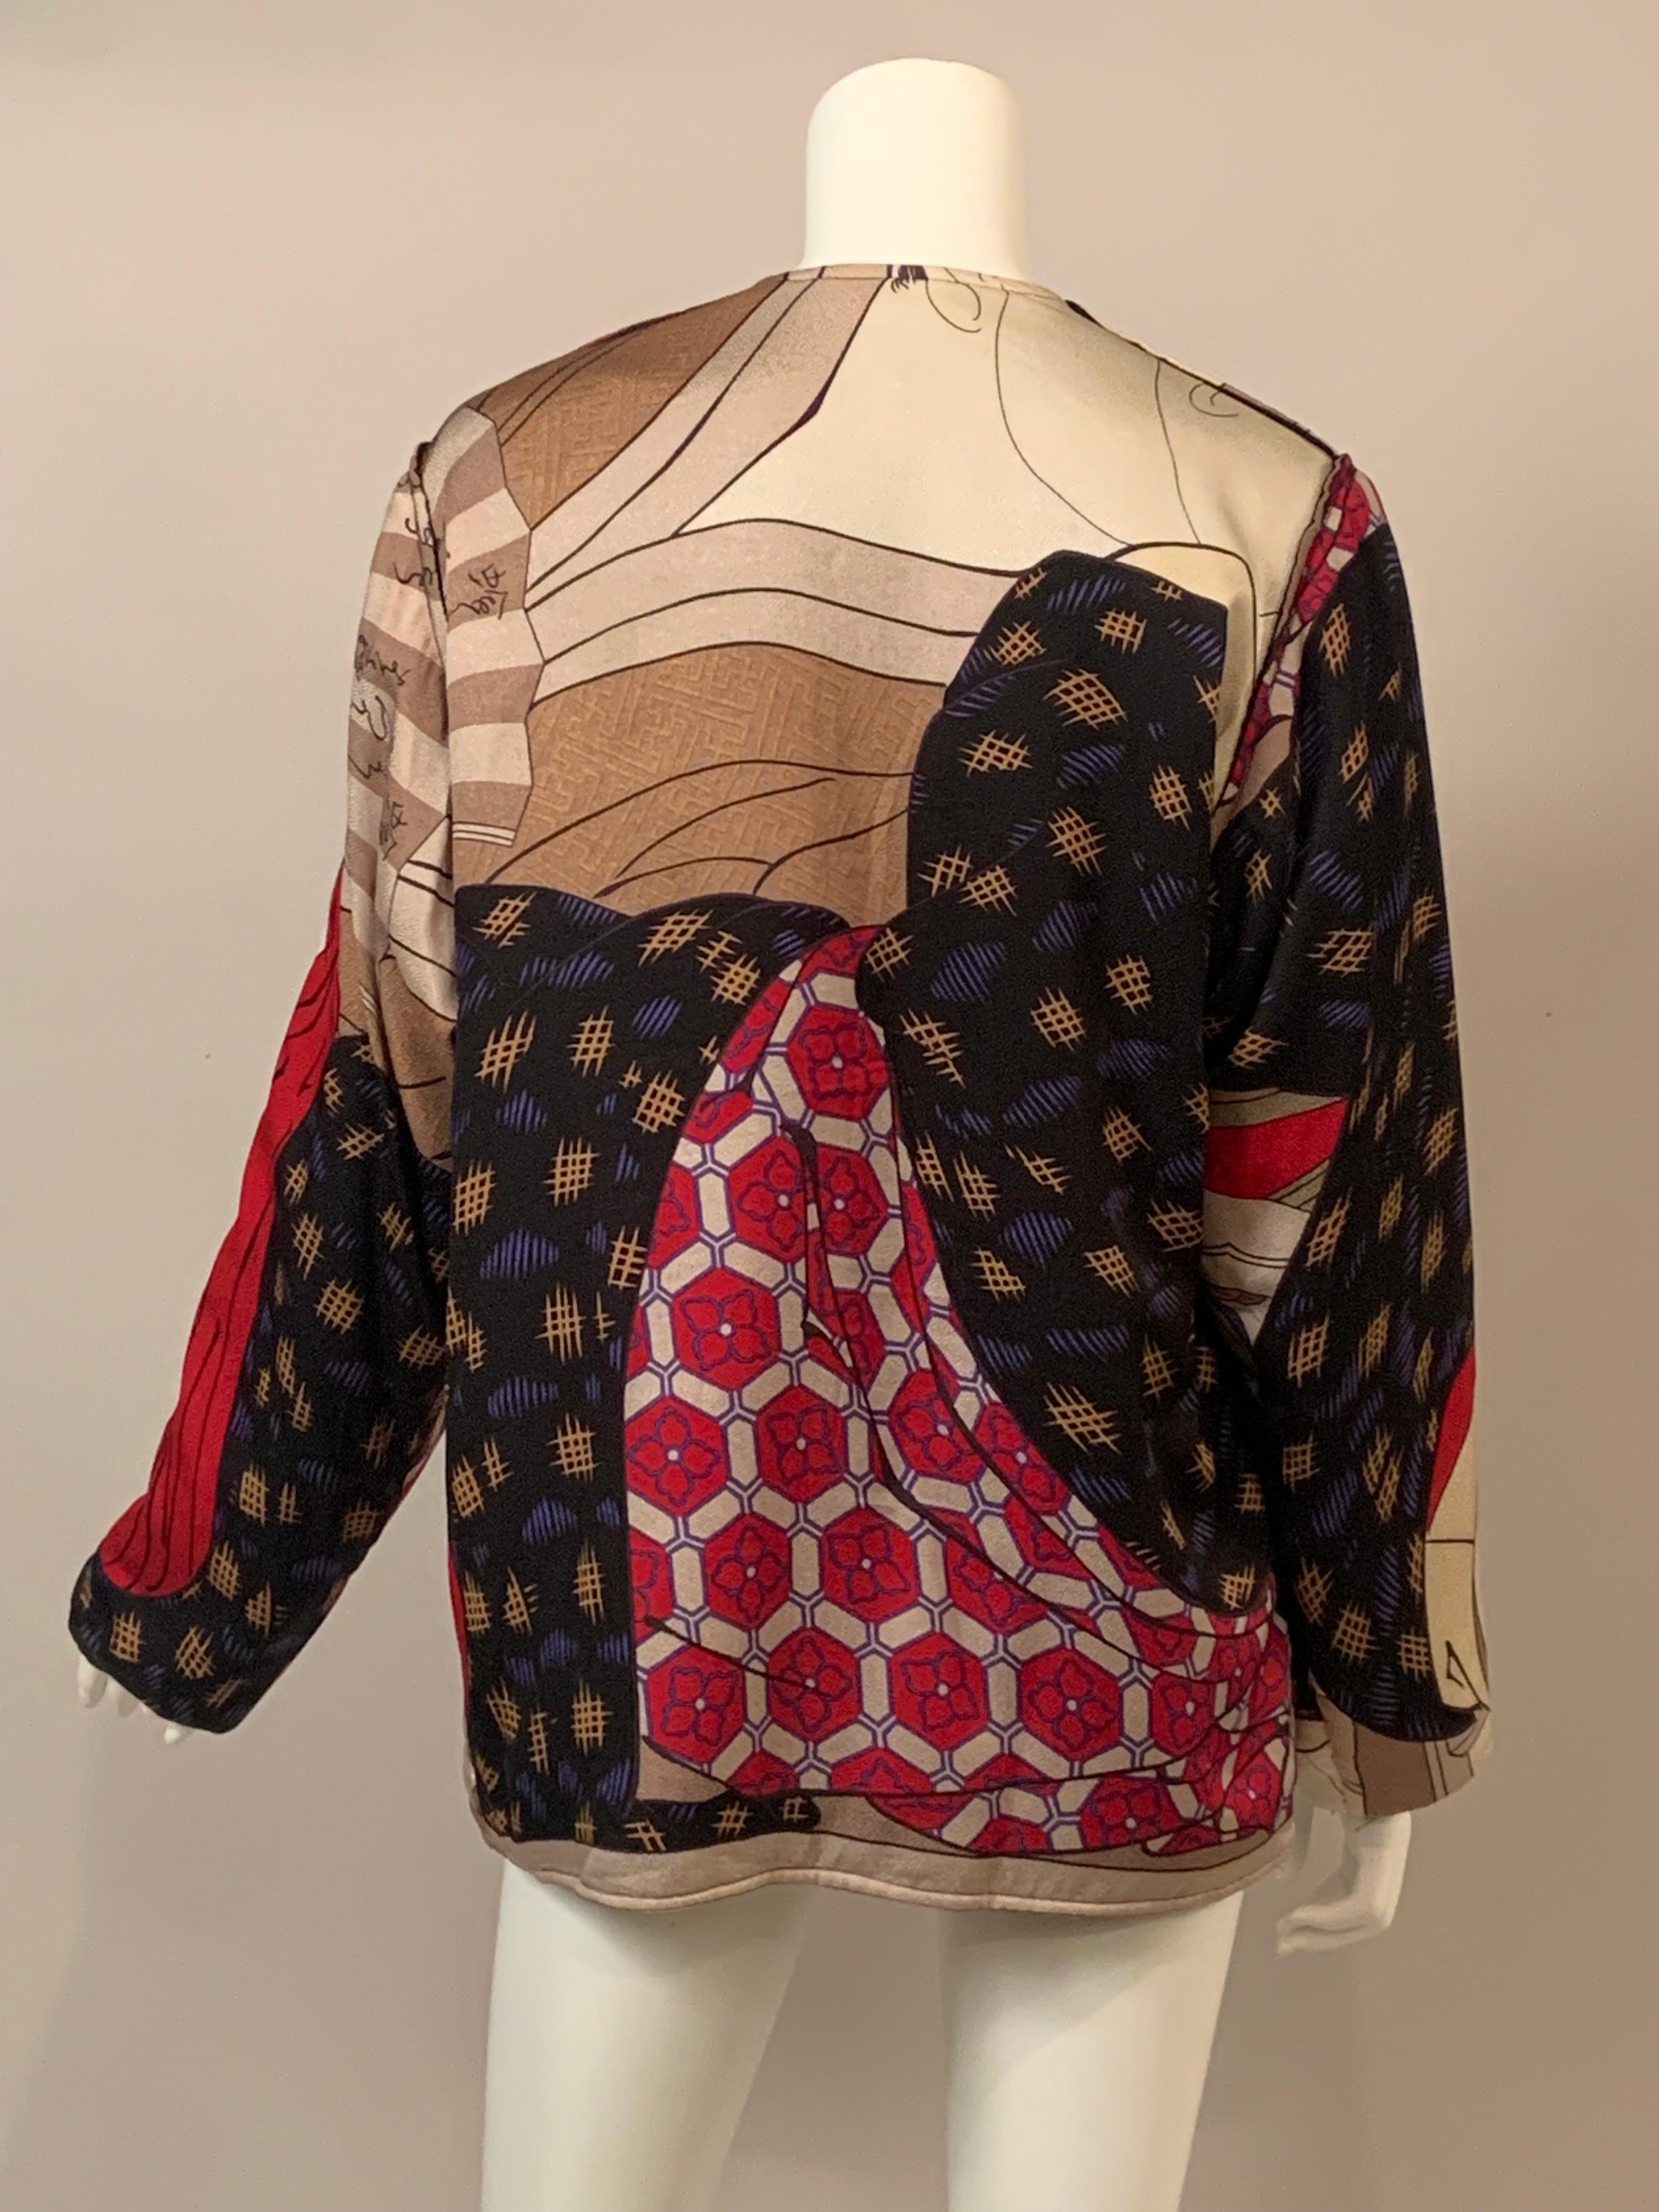 Jacques Molko Paris Colorful Asian Inspired Silk Print Jacket For Sale 3